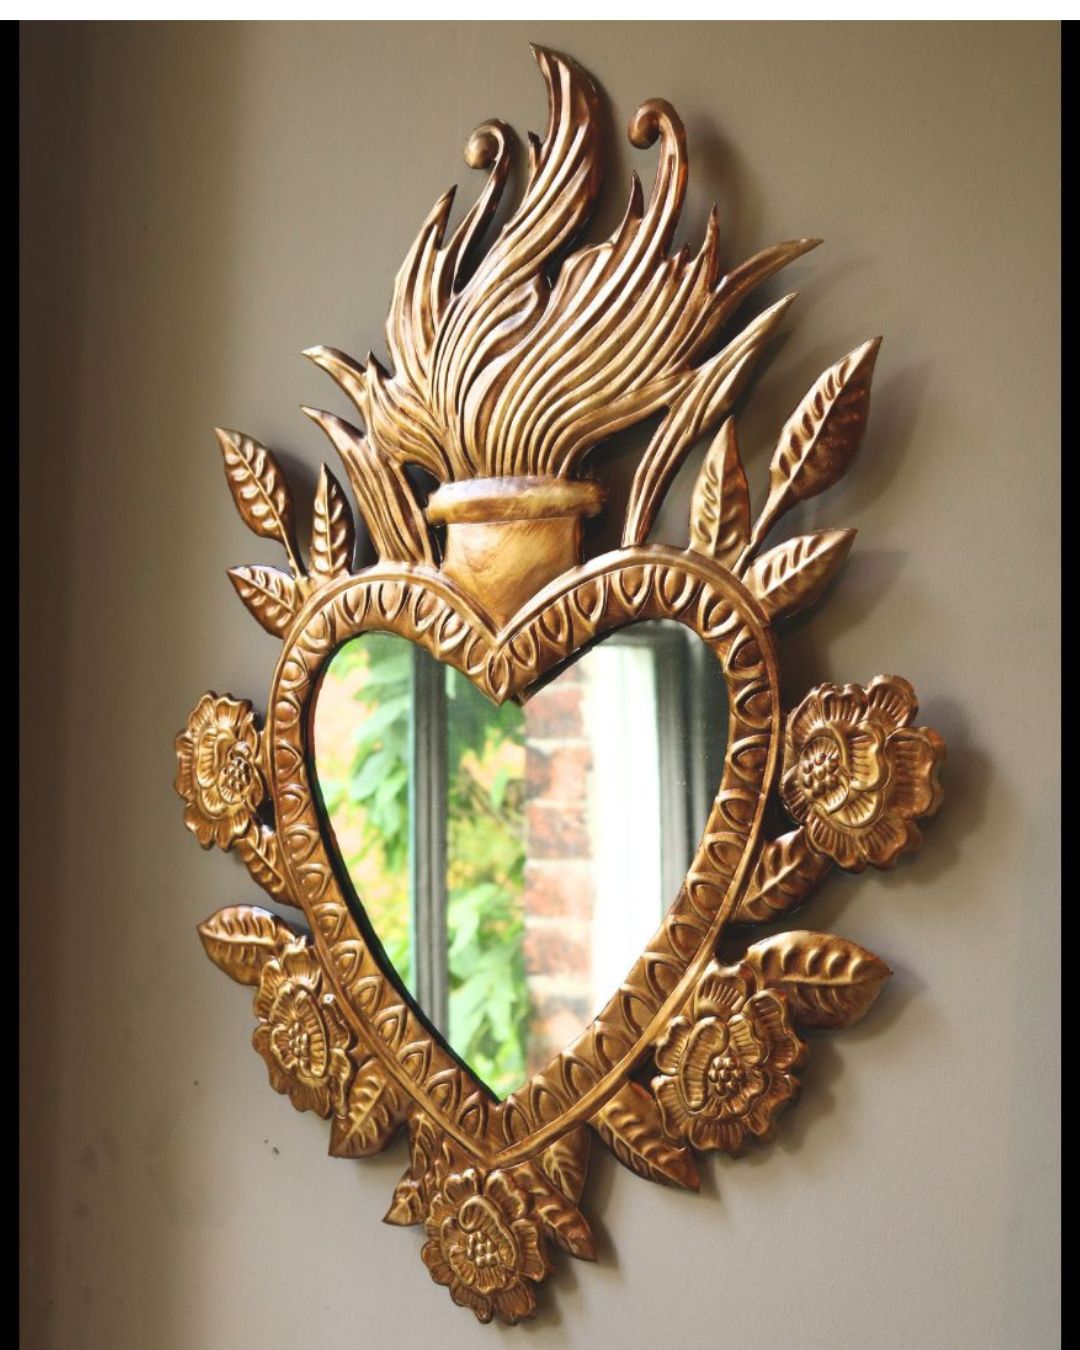 Gold Flaming Floral Heart Mirror